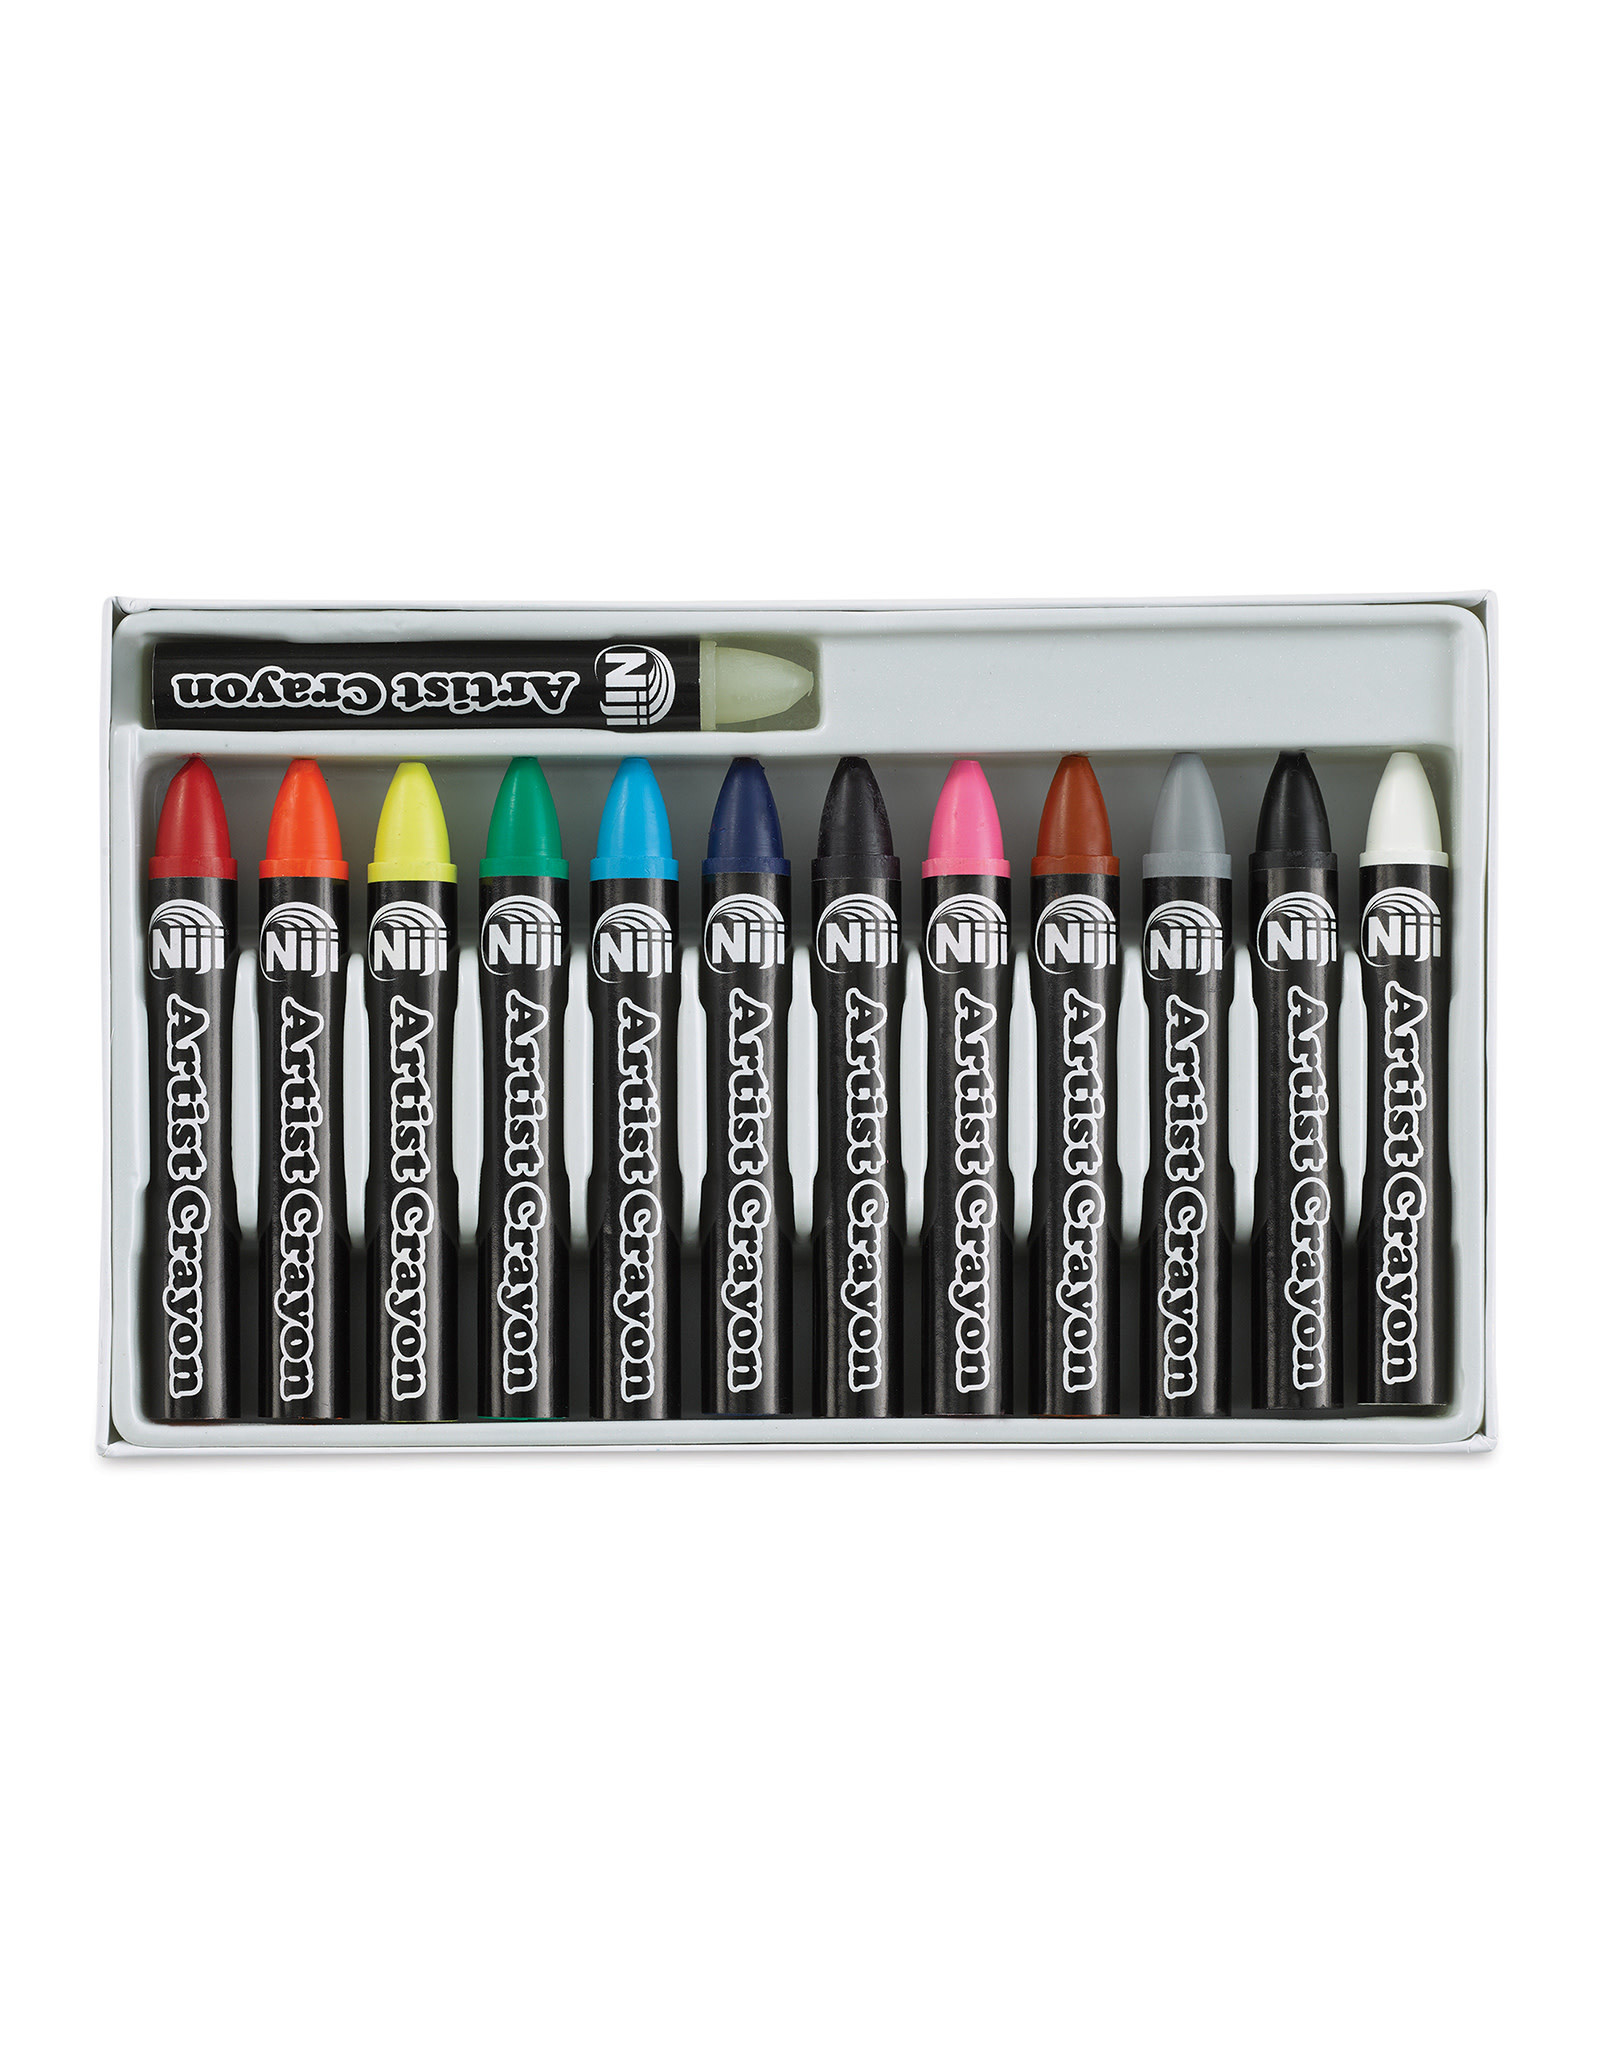 My magic combination to remove crayons, pen, marker and chalk. The